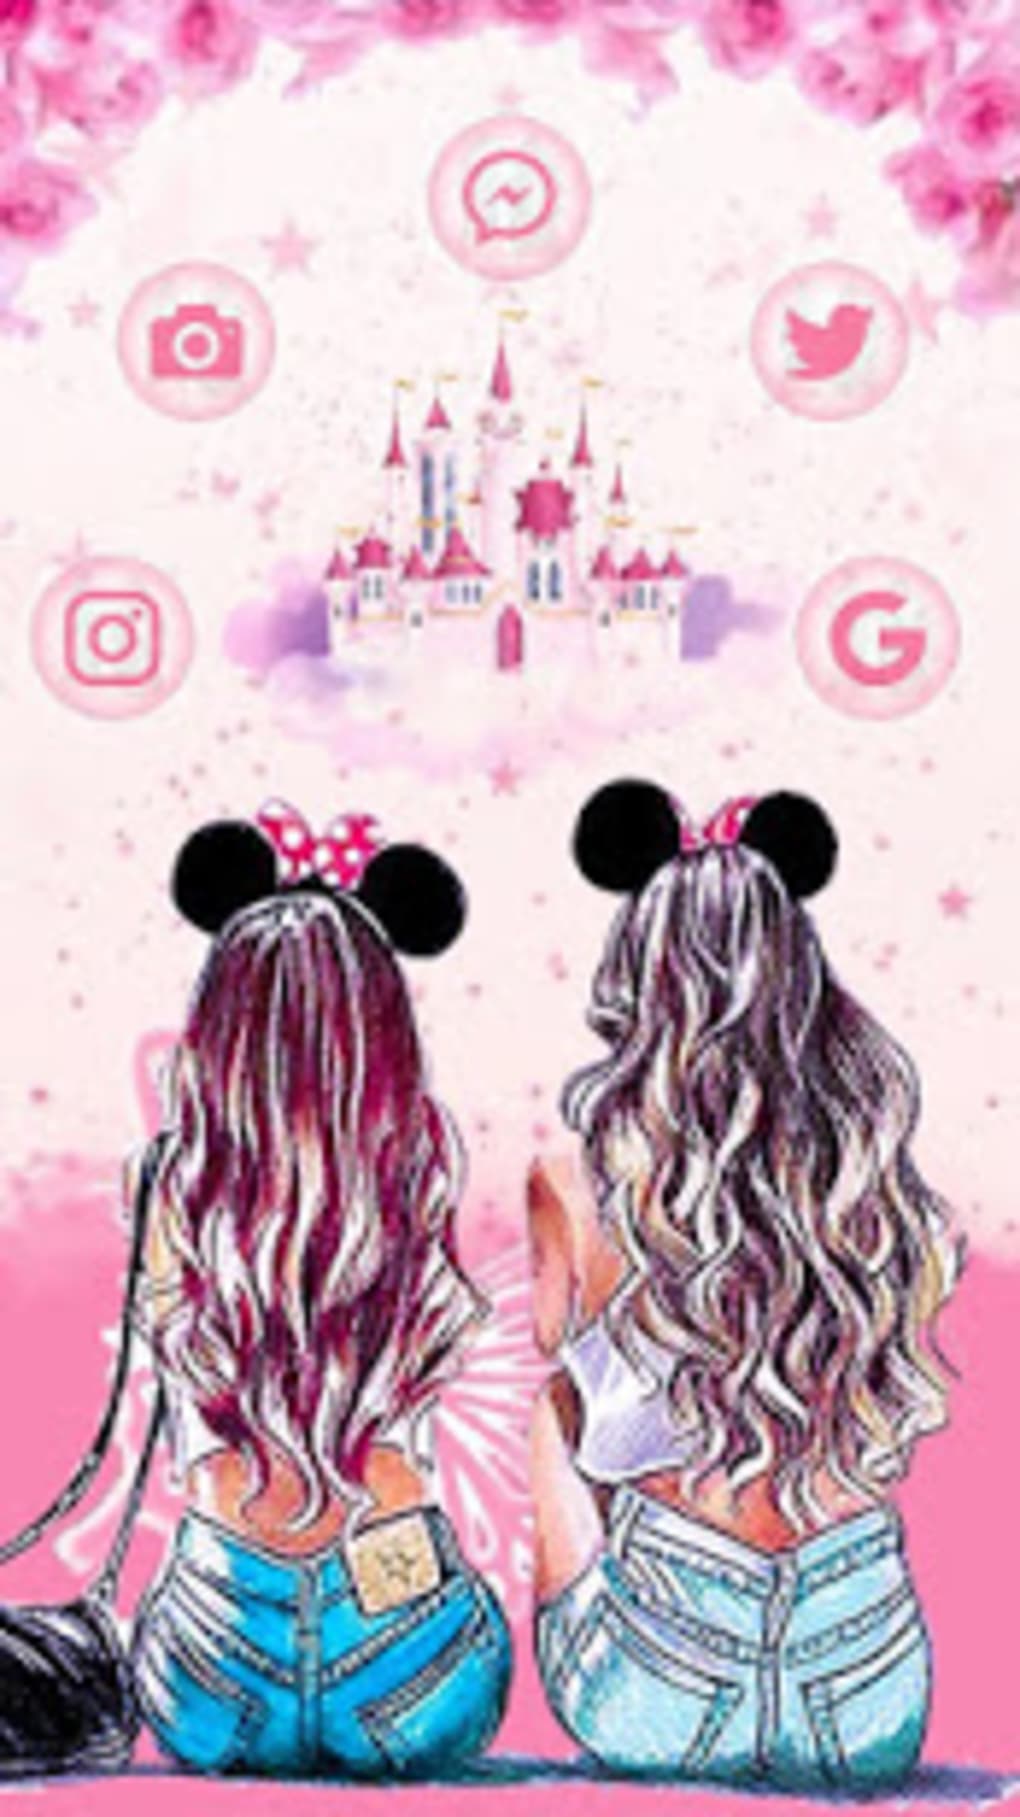 Girls Friendship Themes Live Wallpaper Friend Picture Drawing